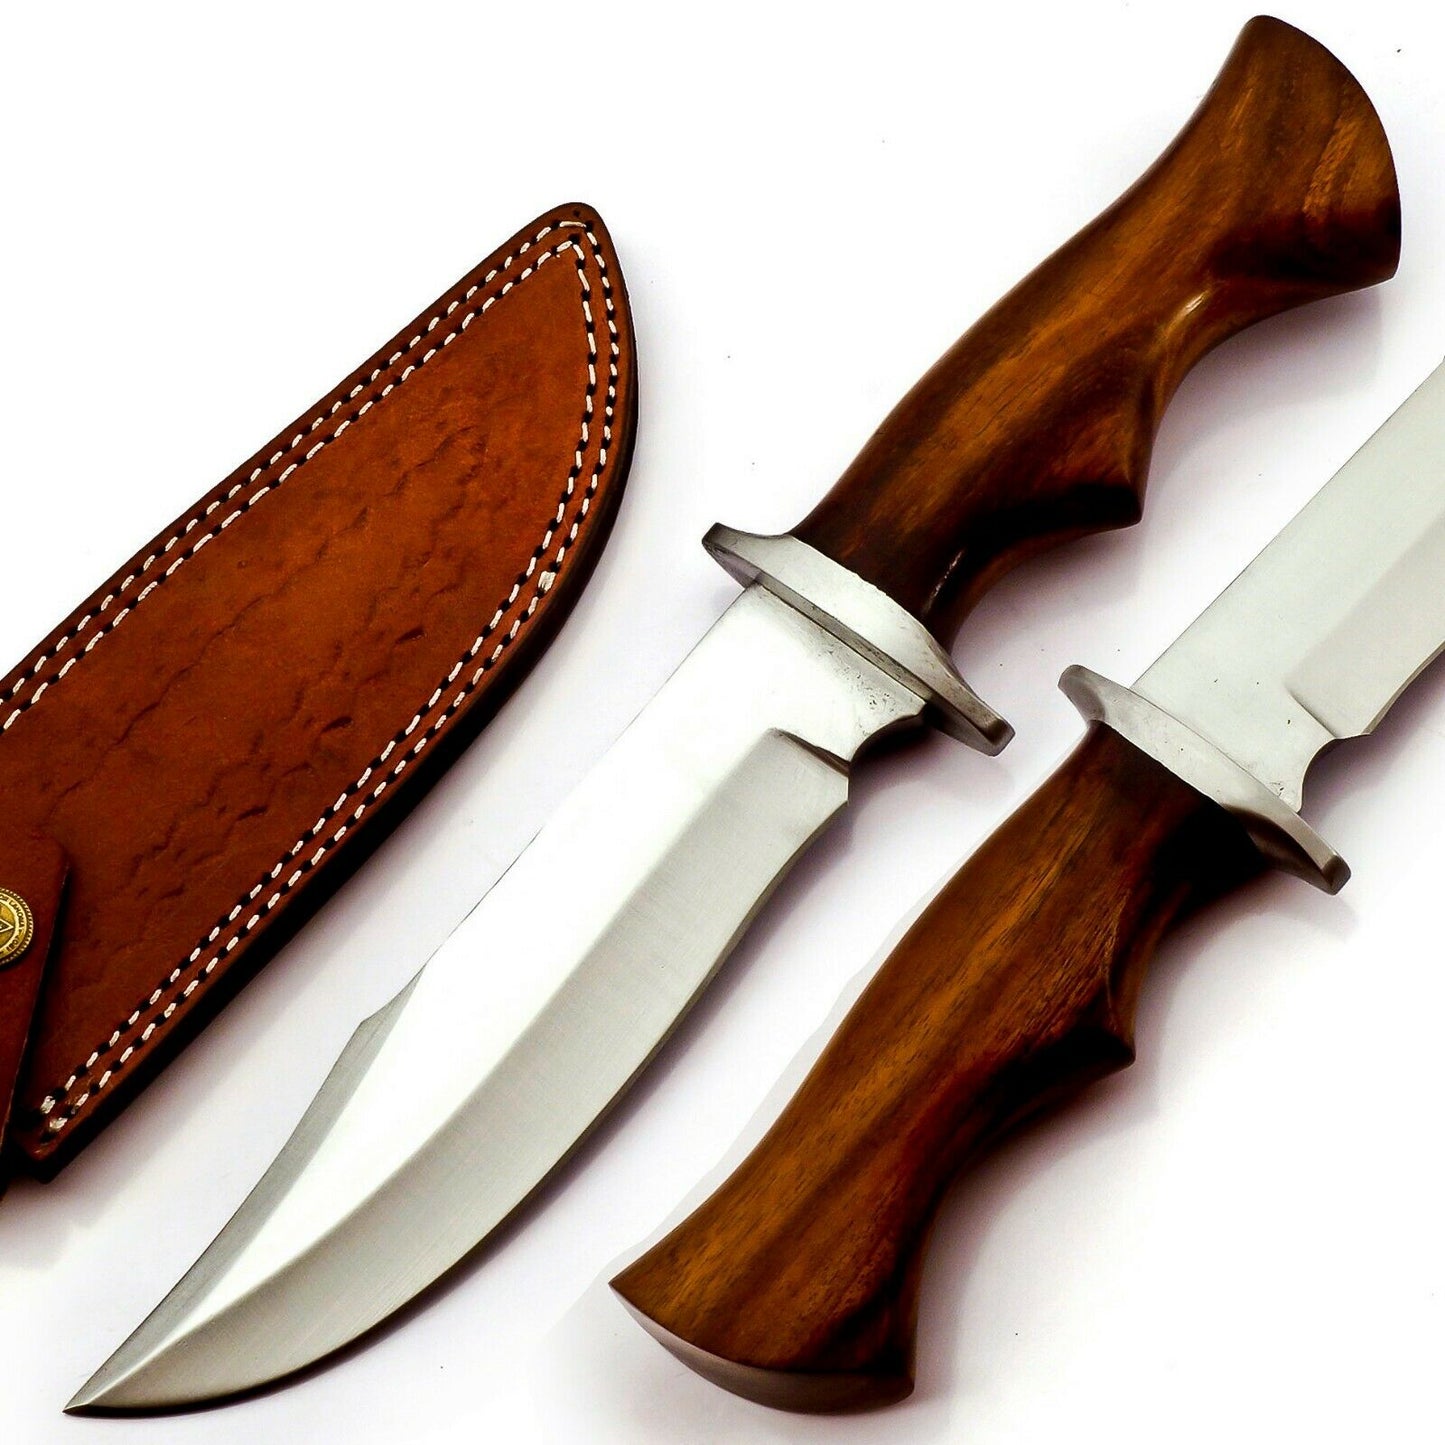 Handmade 440c Stainless Steel Bowie knife set with leather sheath 3pcs Limited